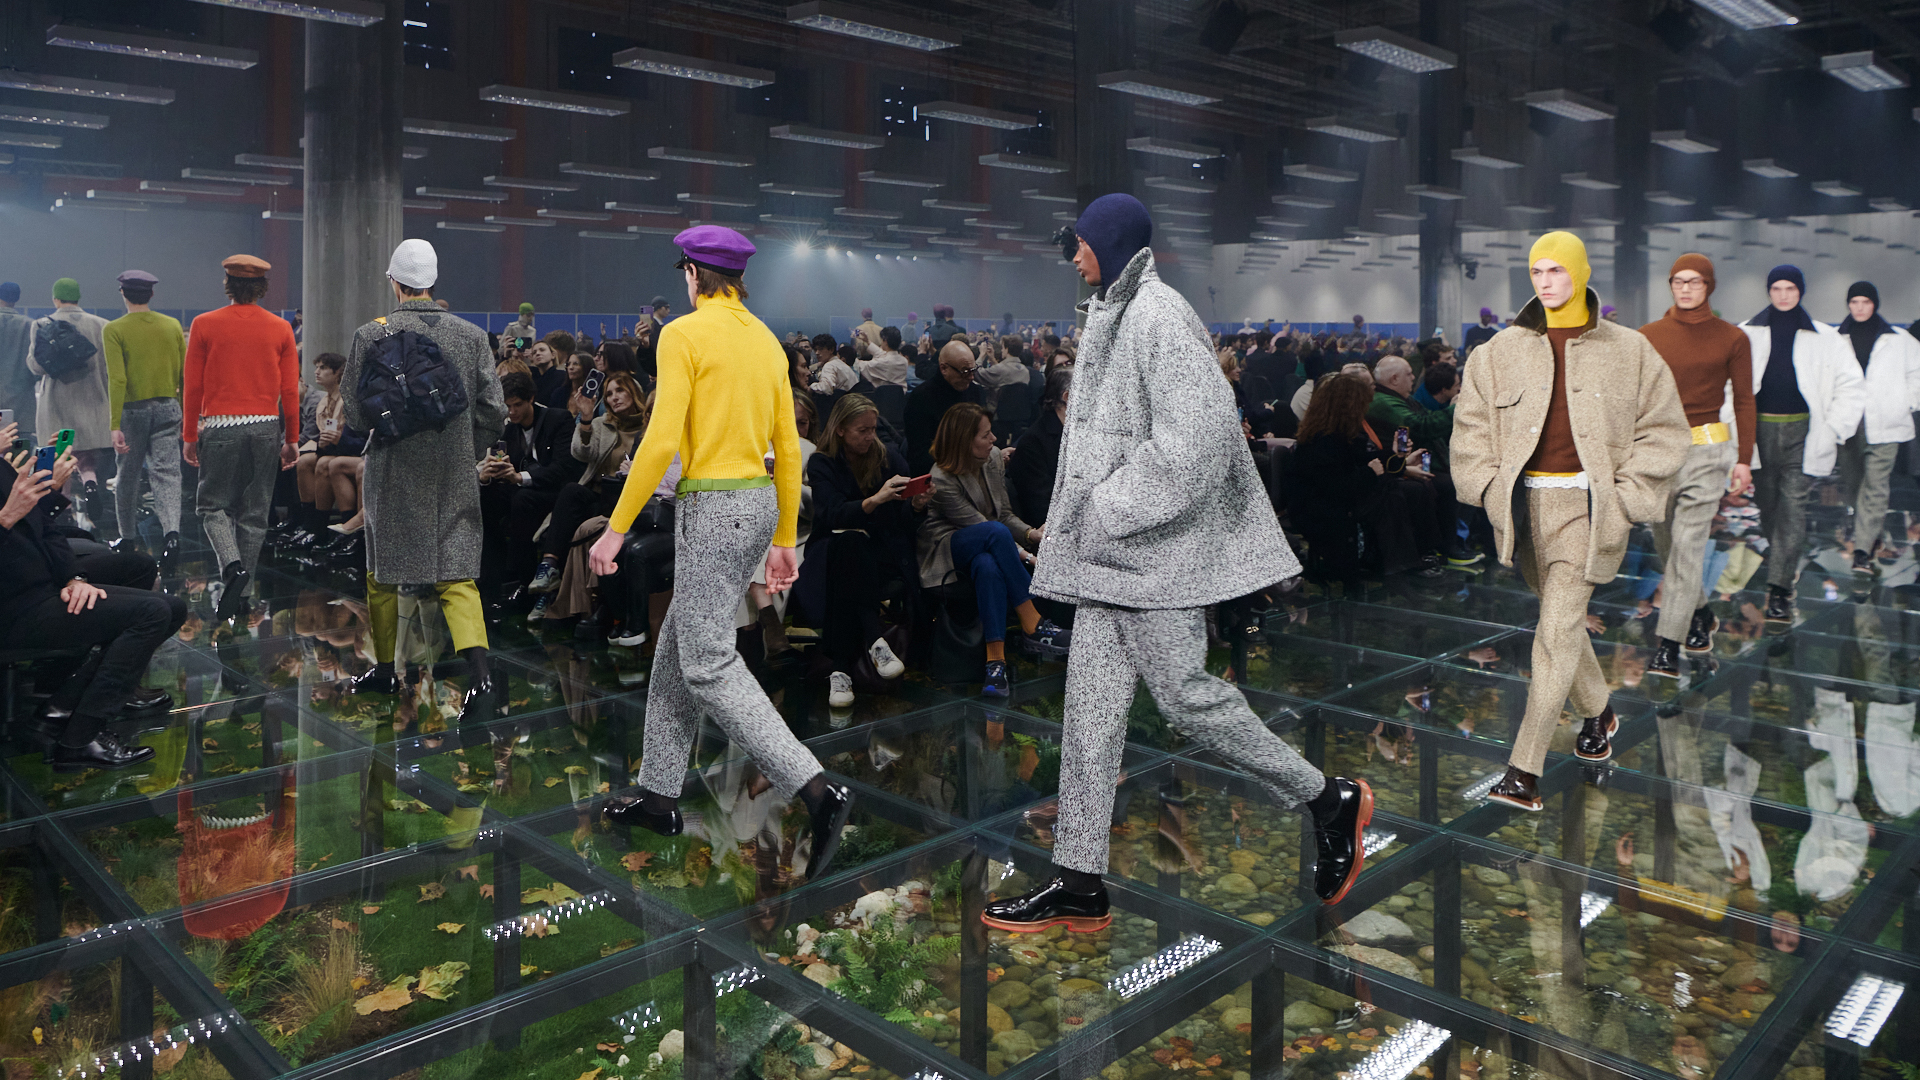 Models in the Prada Men's FW24 collection walking on a transparent glass runway over an artificial autumnal forest floor, with audience members on either side capturing the event. The fashion showcases a mix of vibrant and muted tones with varied textures, highlighted by distinctive Prada headwear.